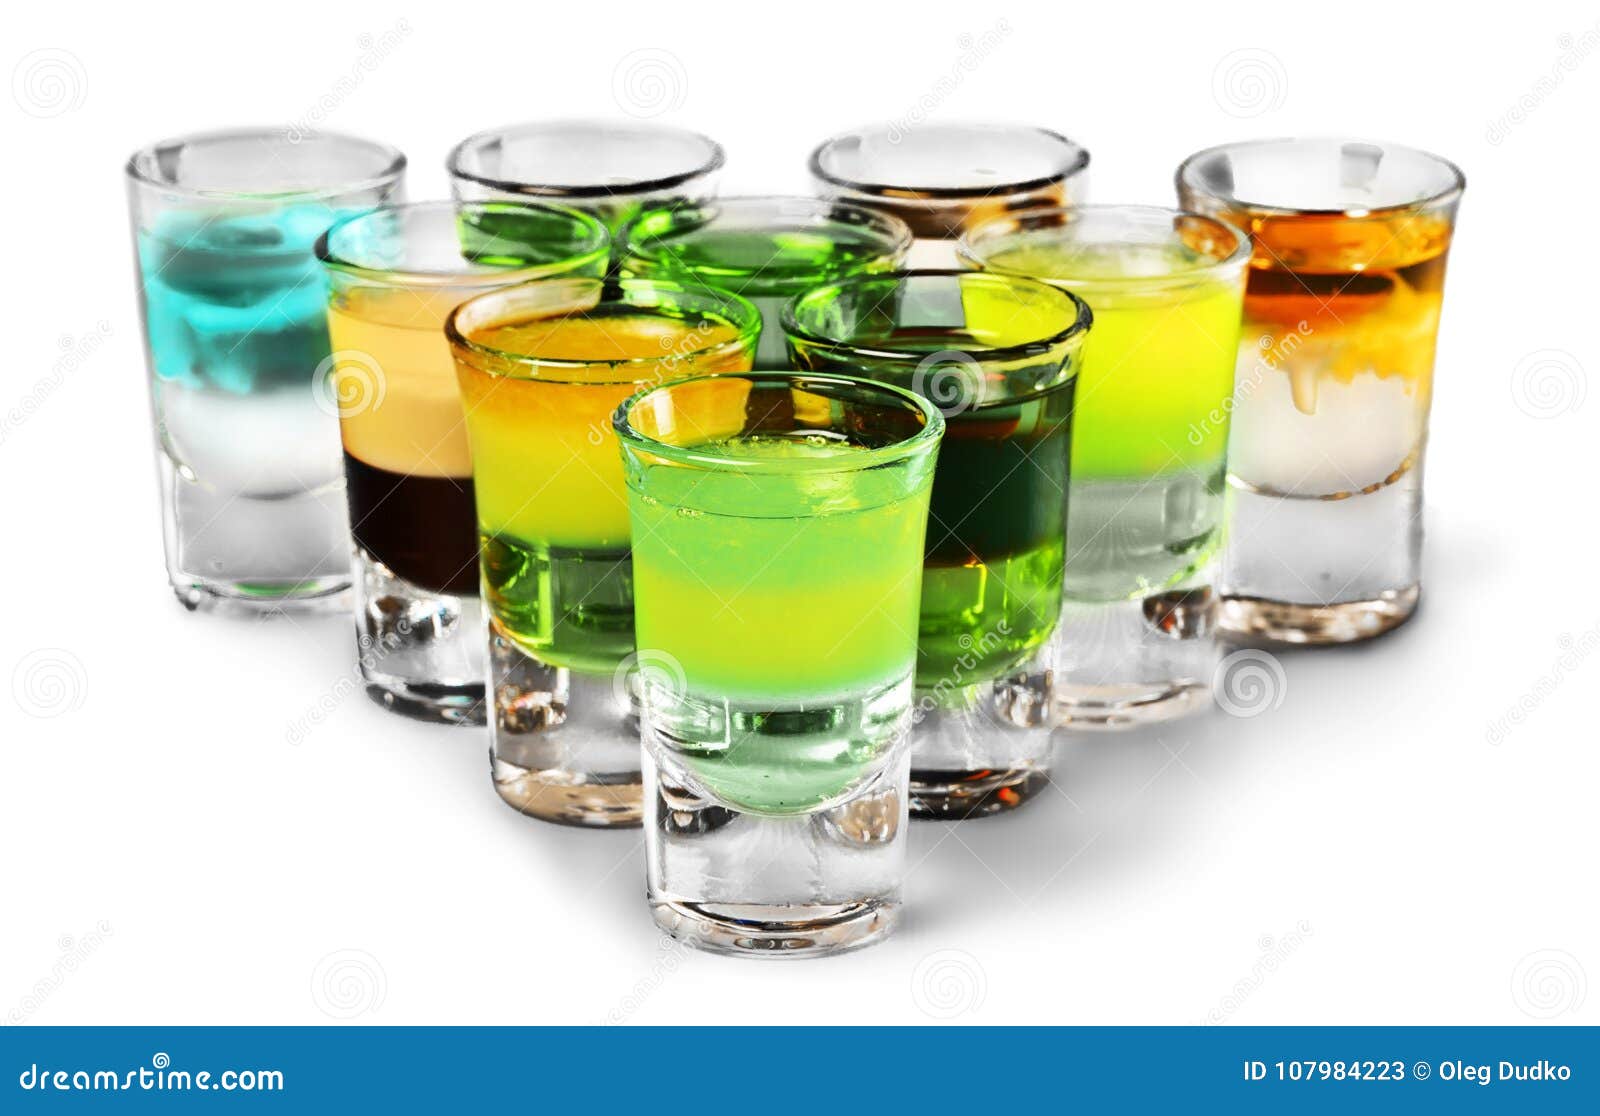 colourful shot drinks on a white background with